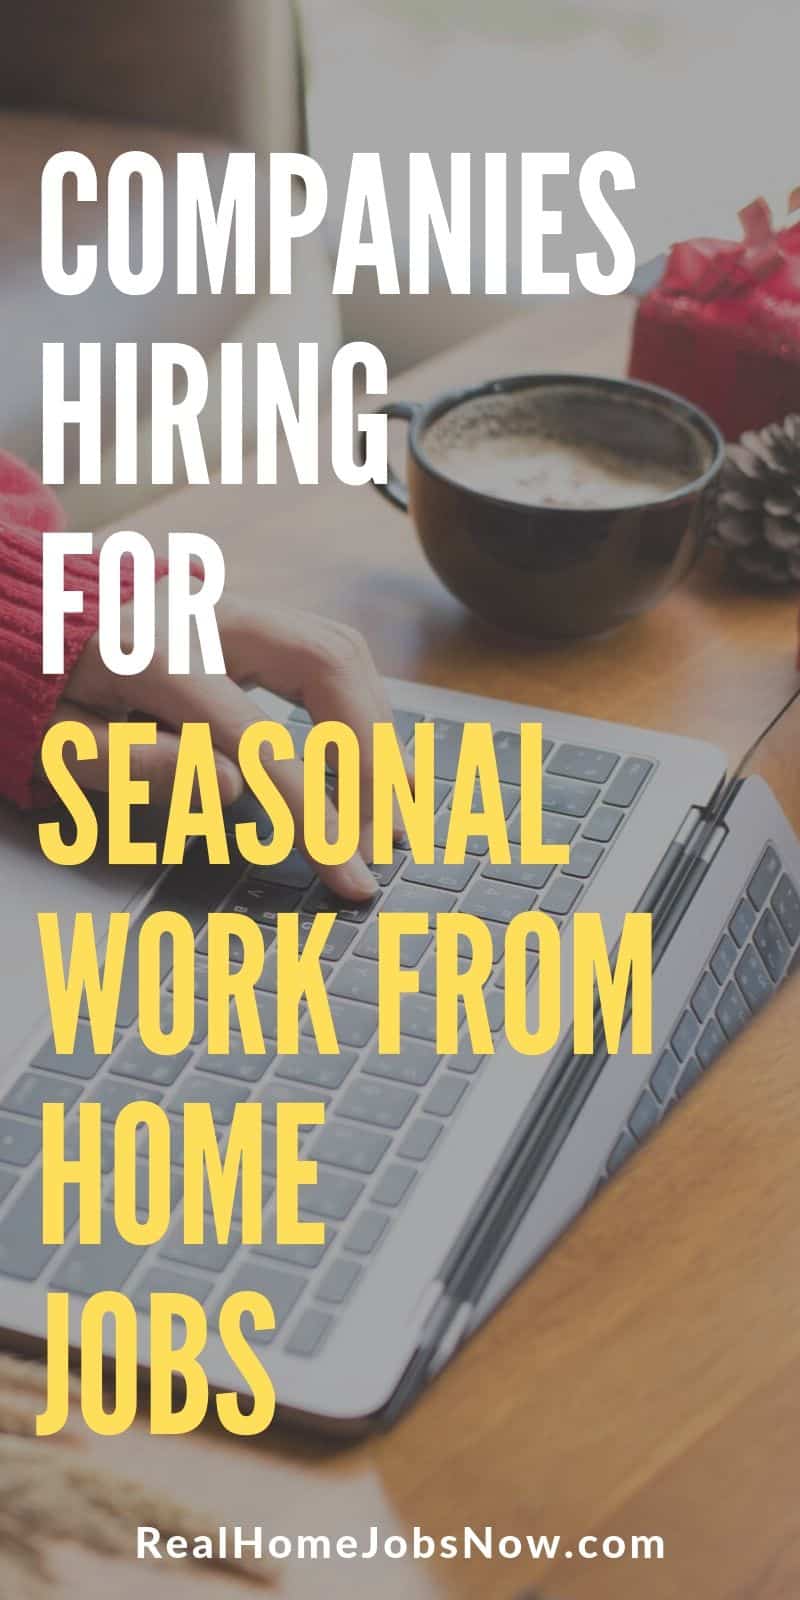 If you are looking for some extra holiday cash try these companies hiring for seasonal work from home jobs. Some companies will hire only for the season, but you might be able to continue full time with benefits. And most of them hire home based employees throughout the year, too!